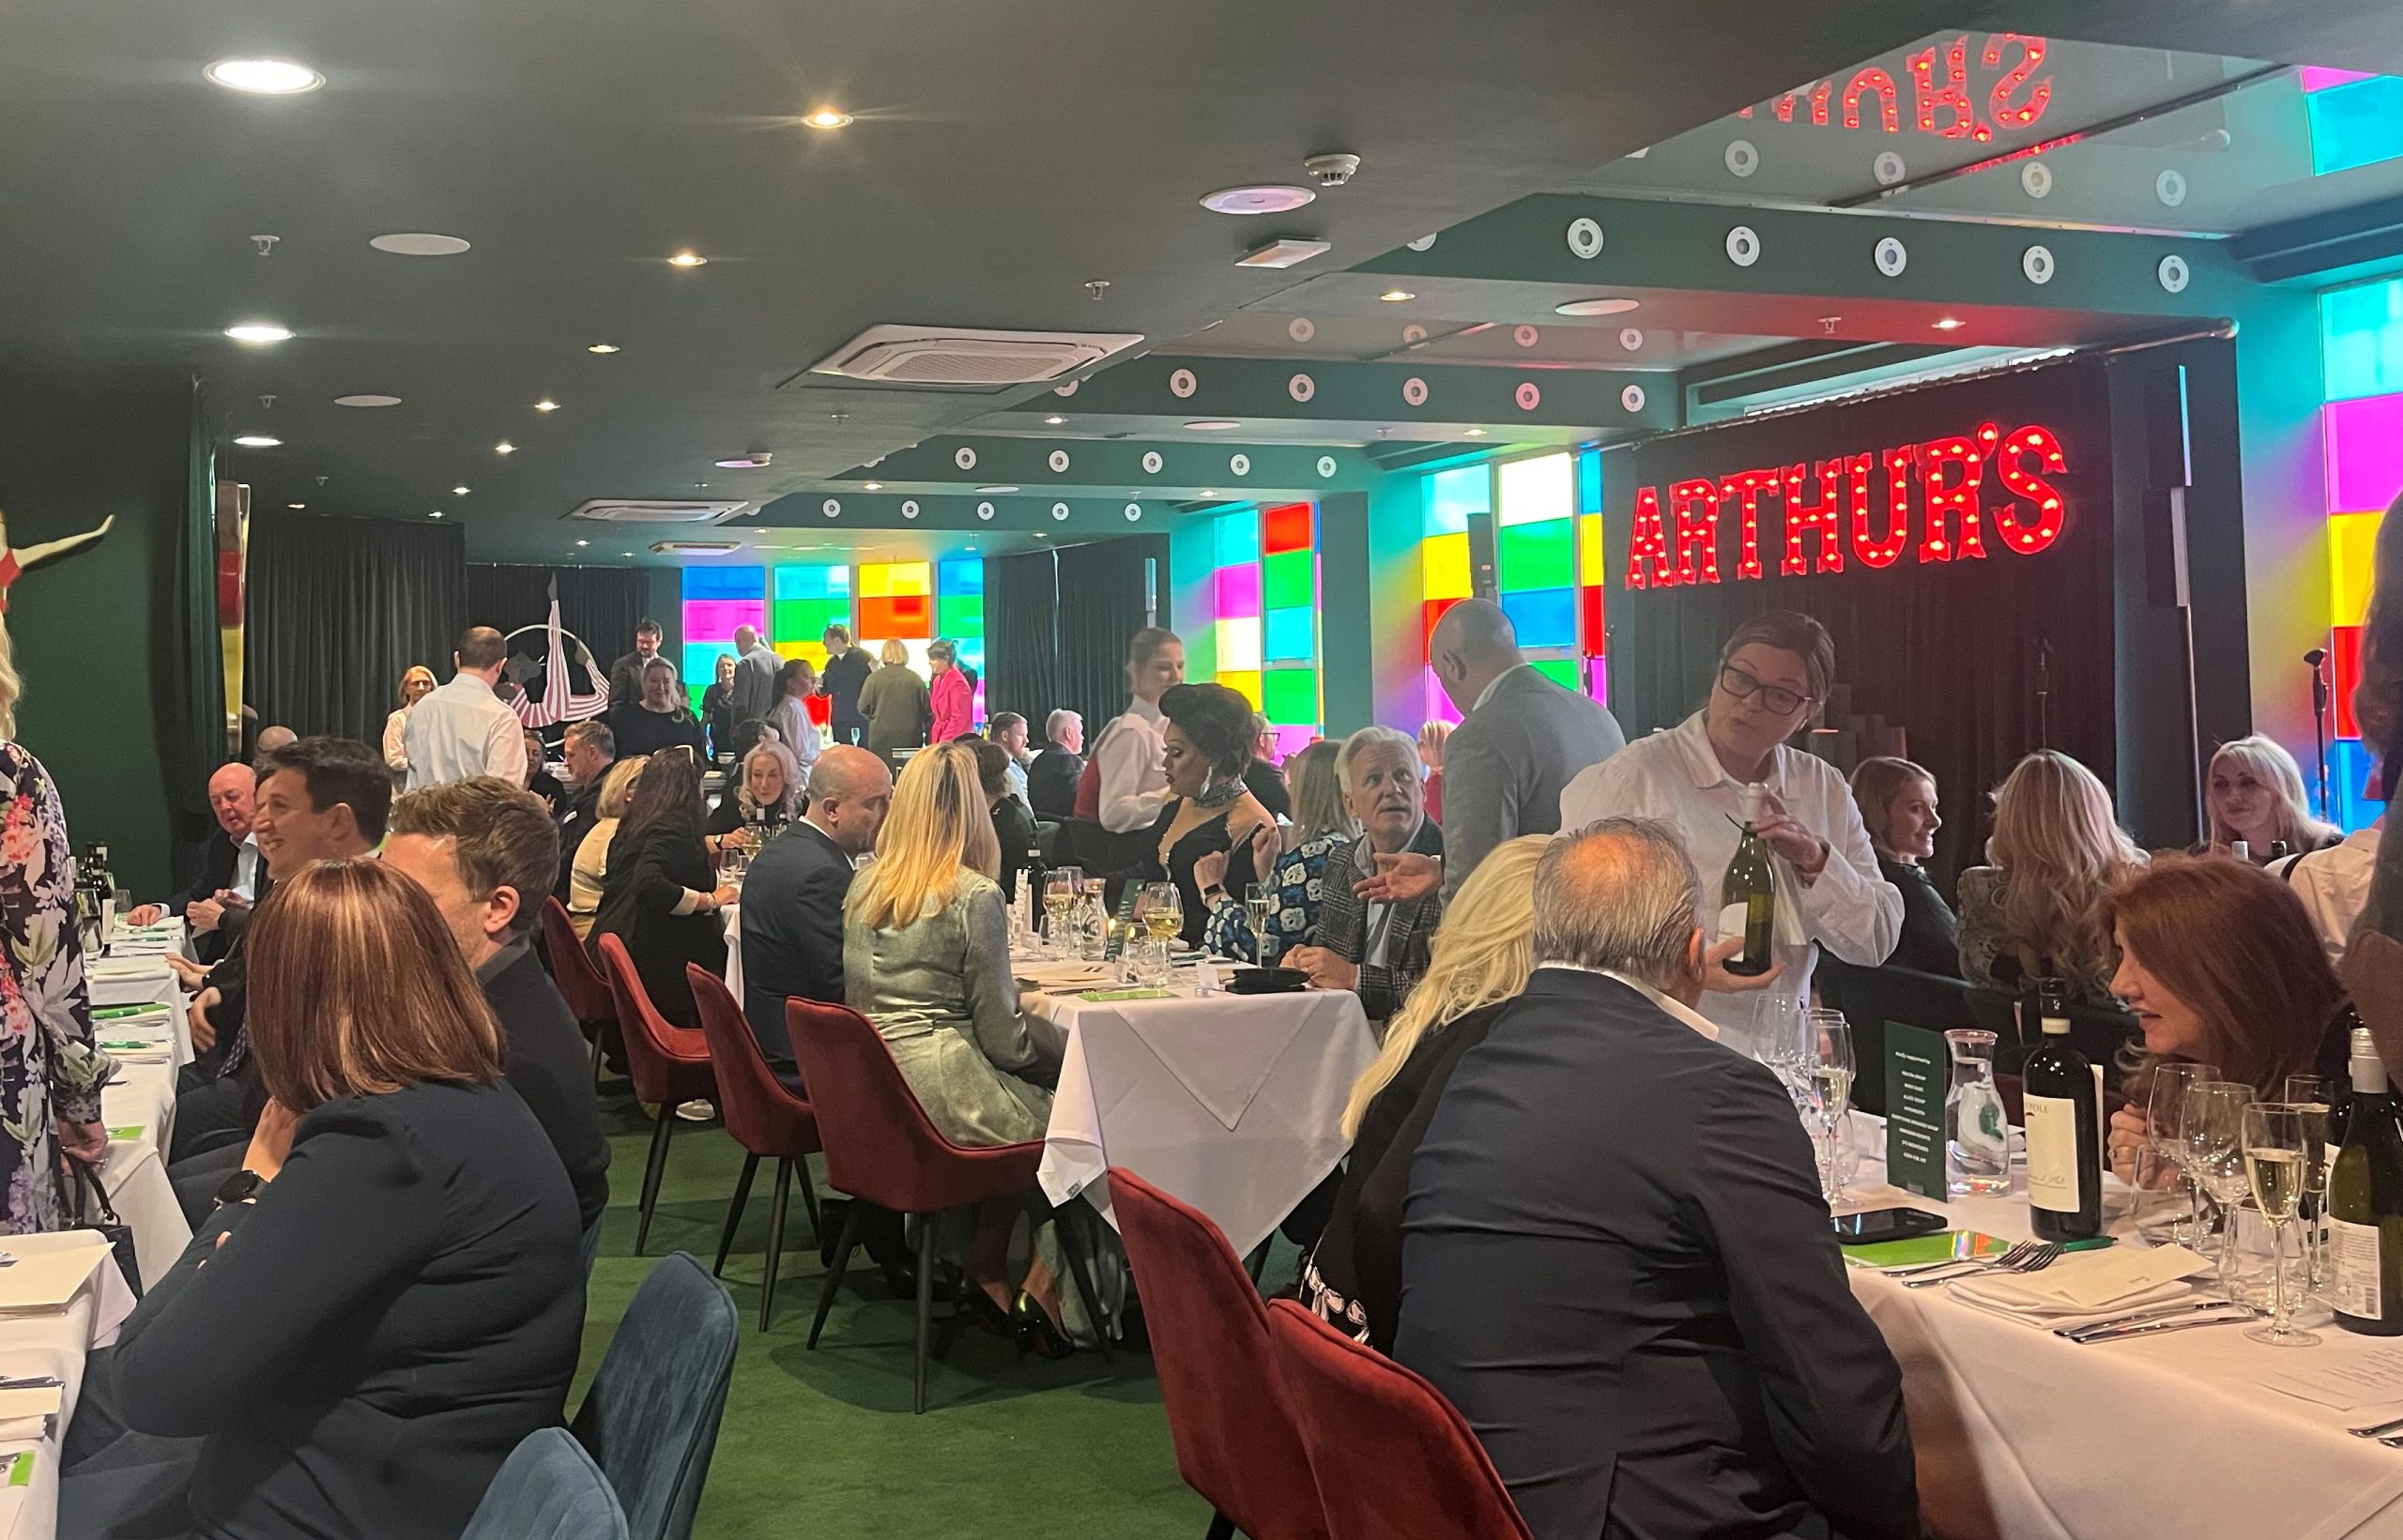 People sat at rows of tables with white tablecloths. The room has green walls and carpets and people are all talking to each other whilst being served by waiters